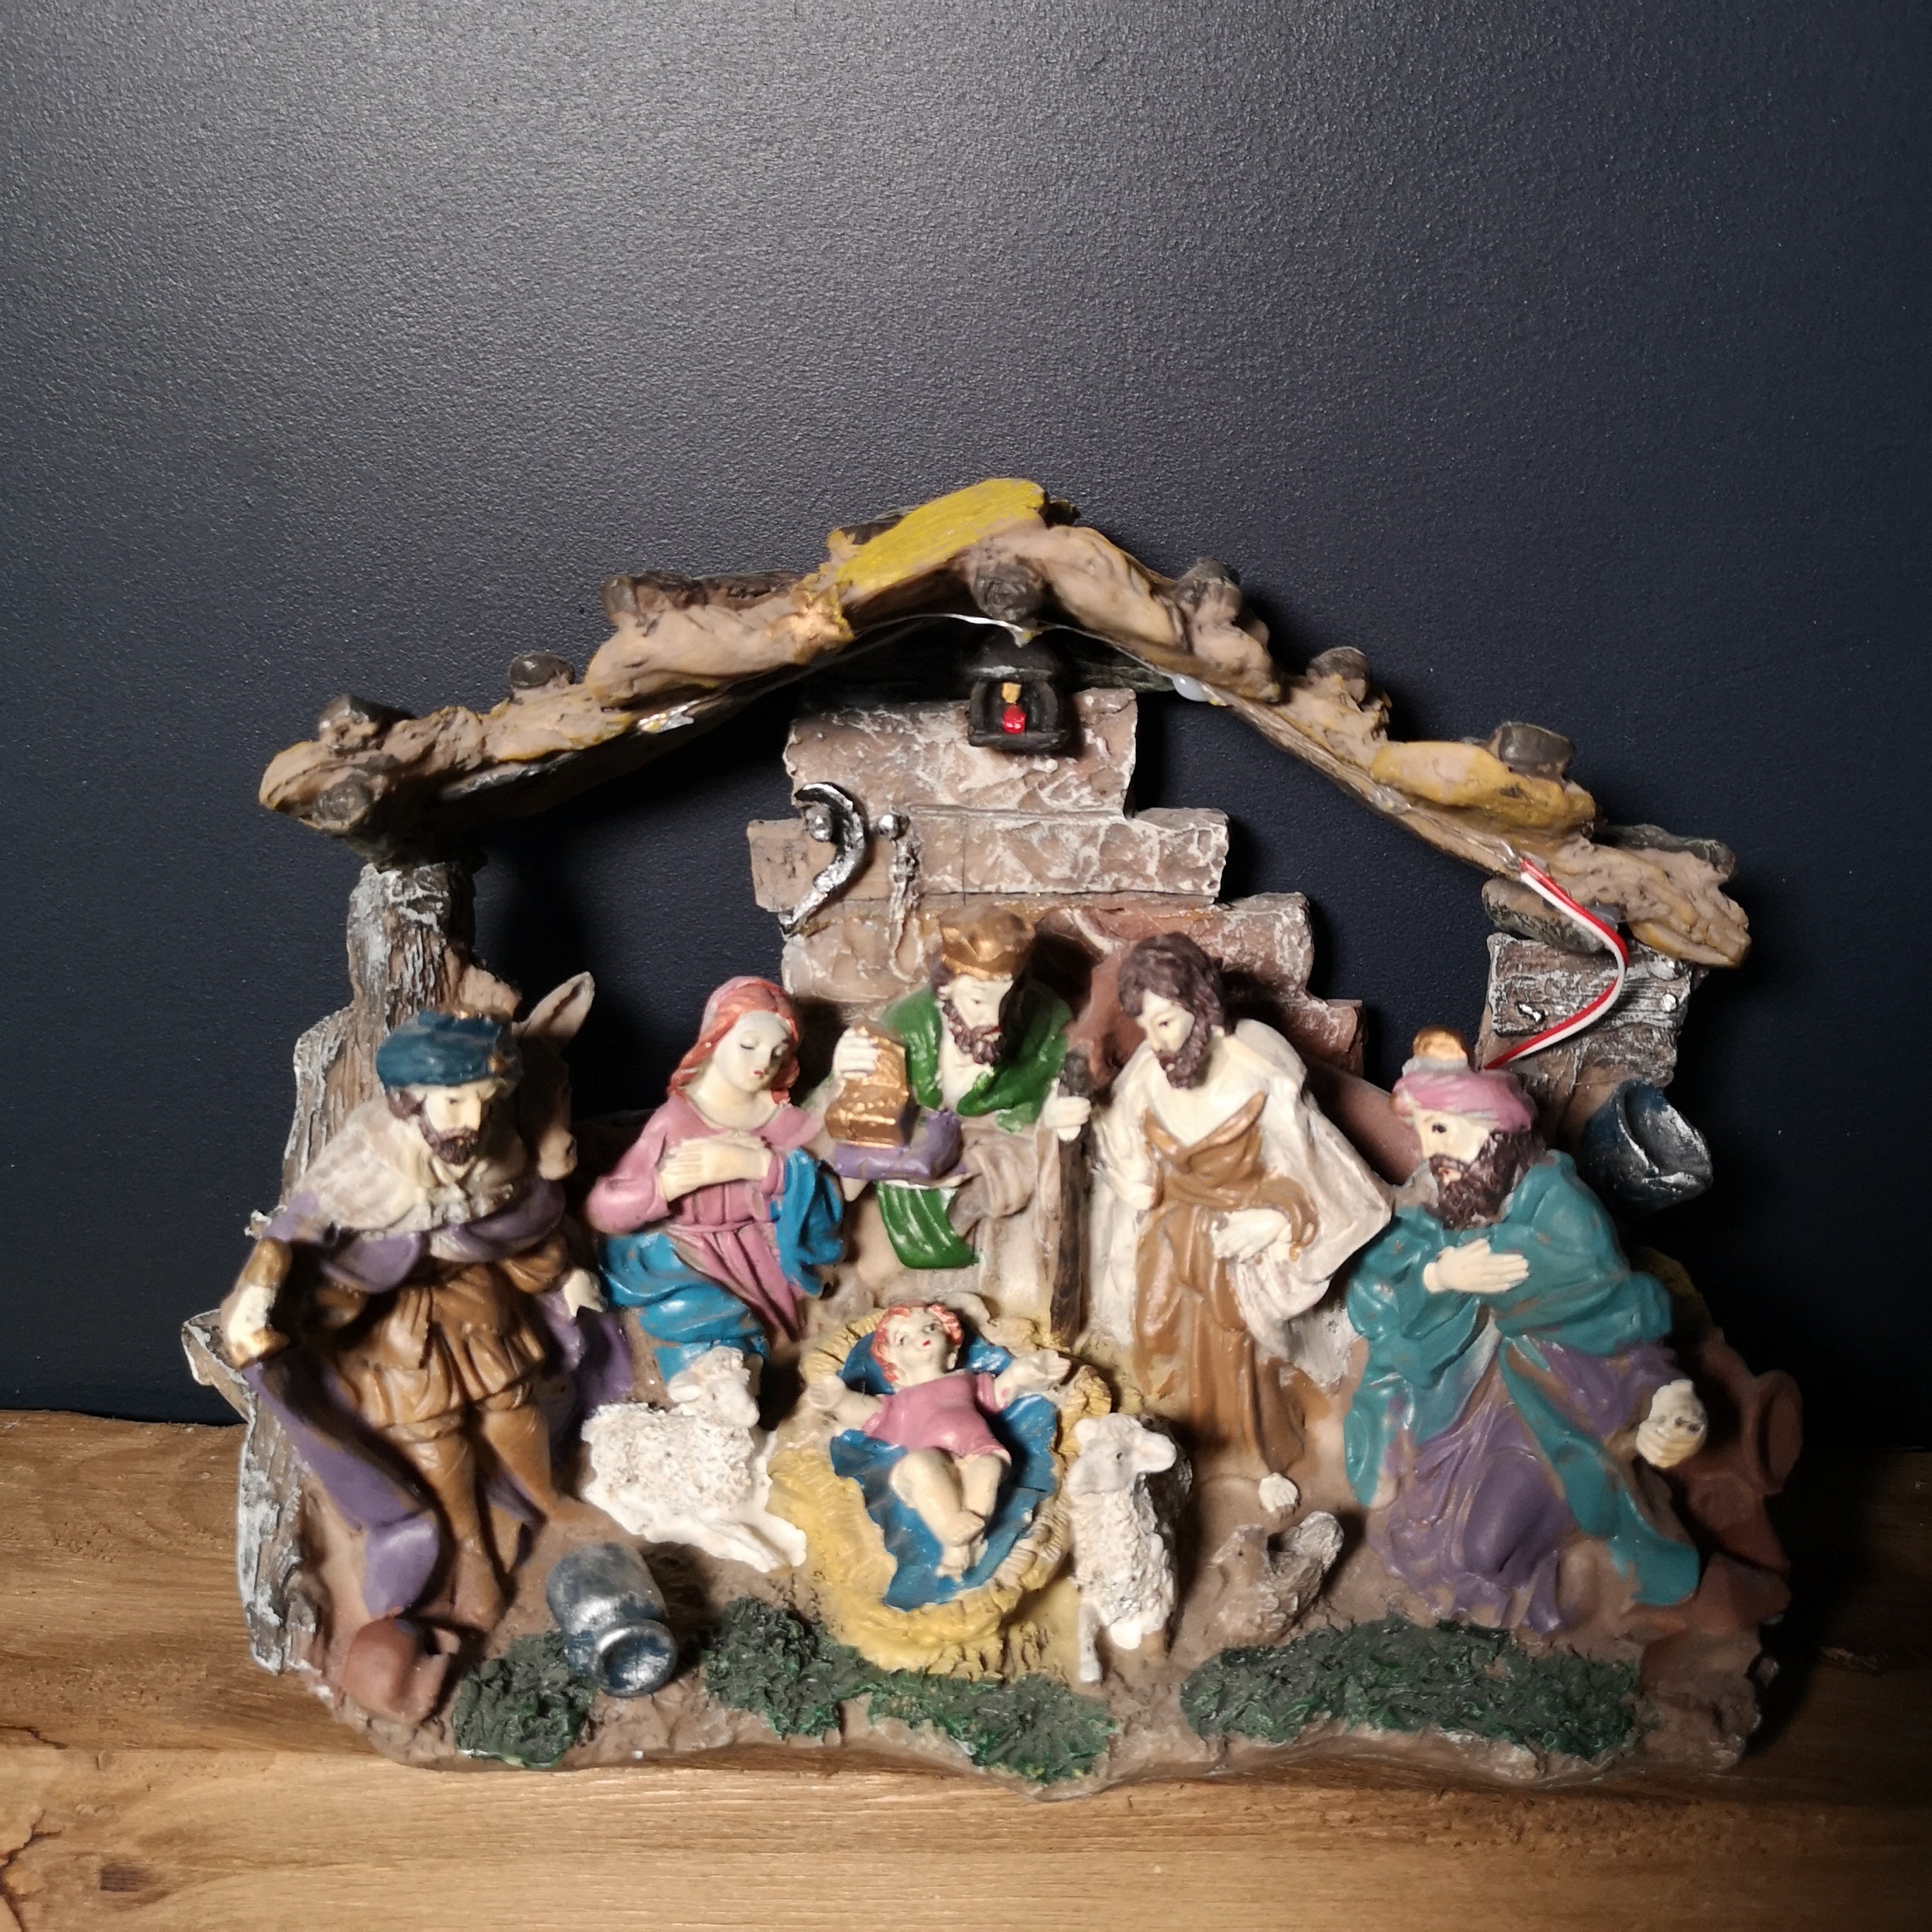 25cm LED Battery Operated Indoor Nativity Christmas Decoration